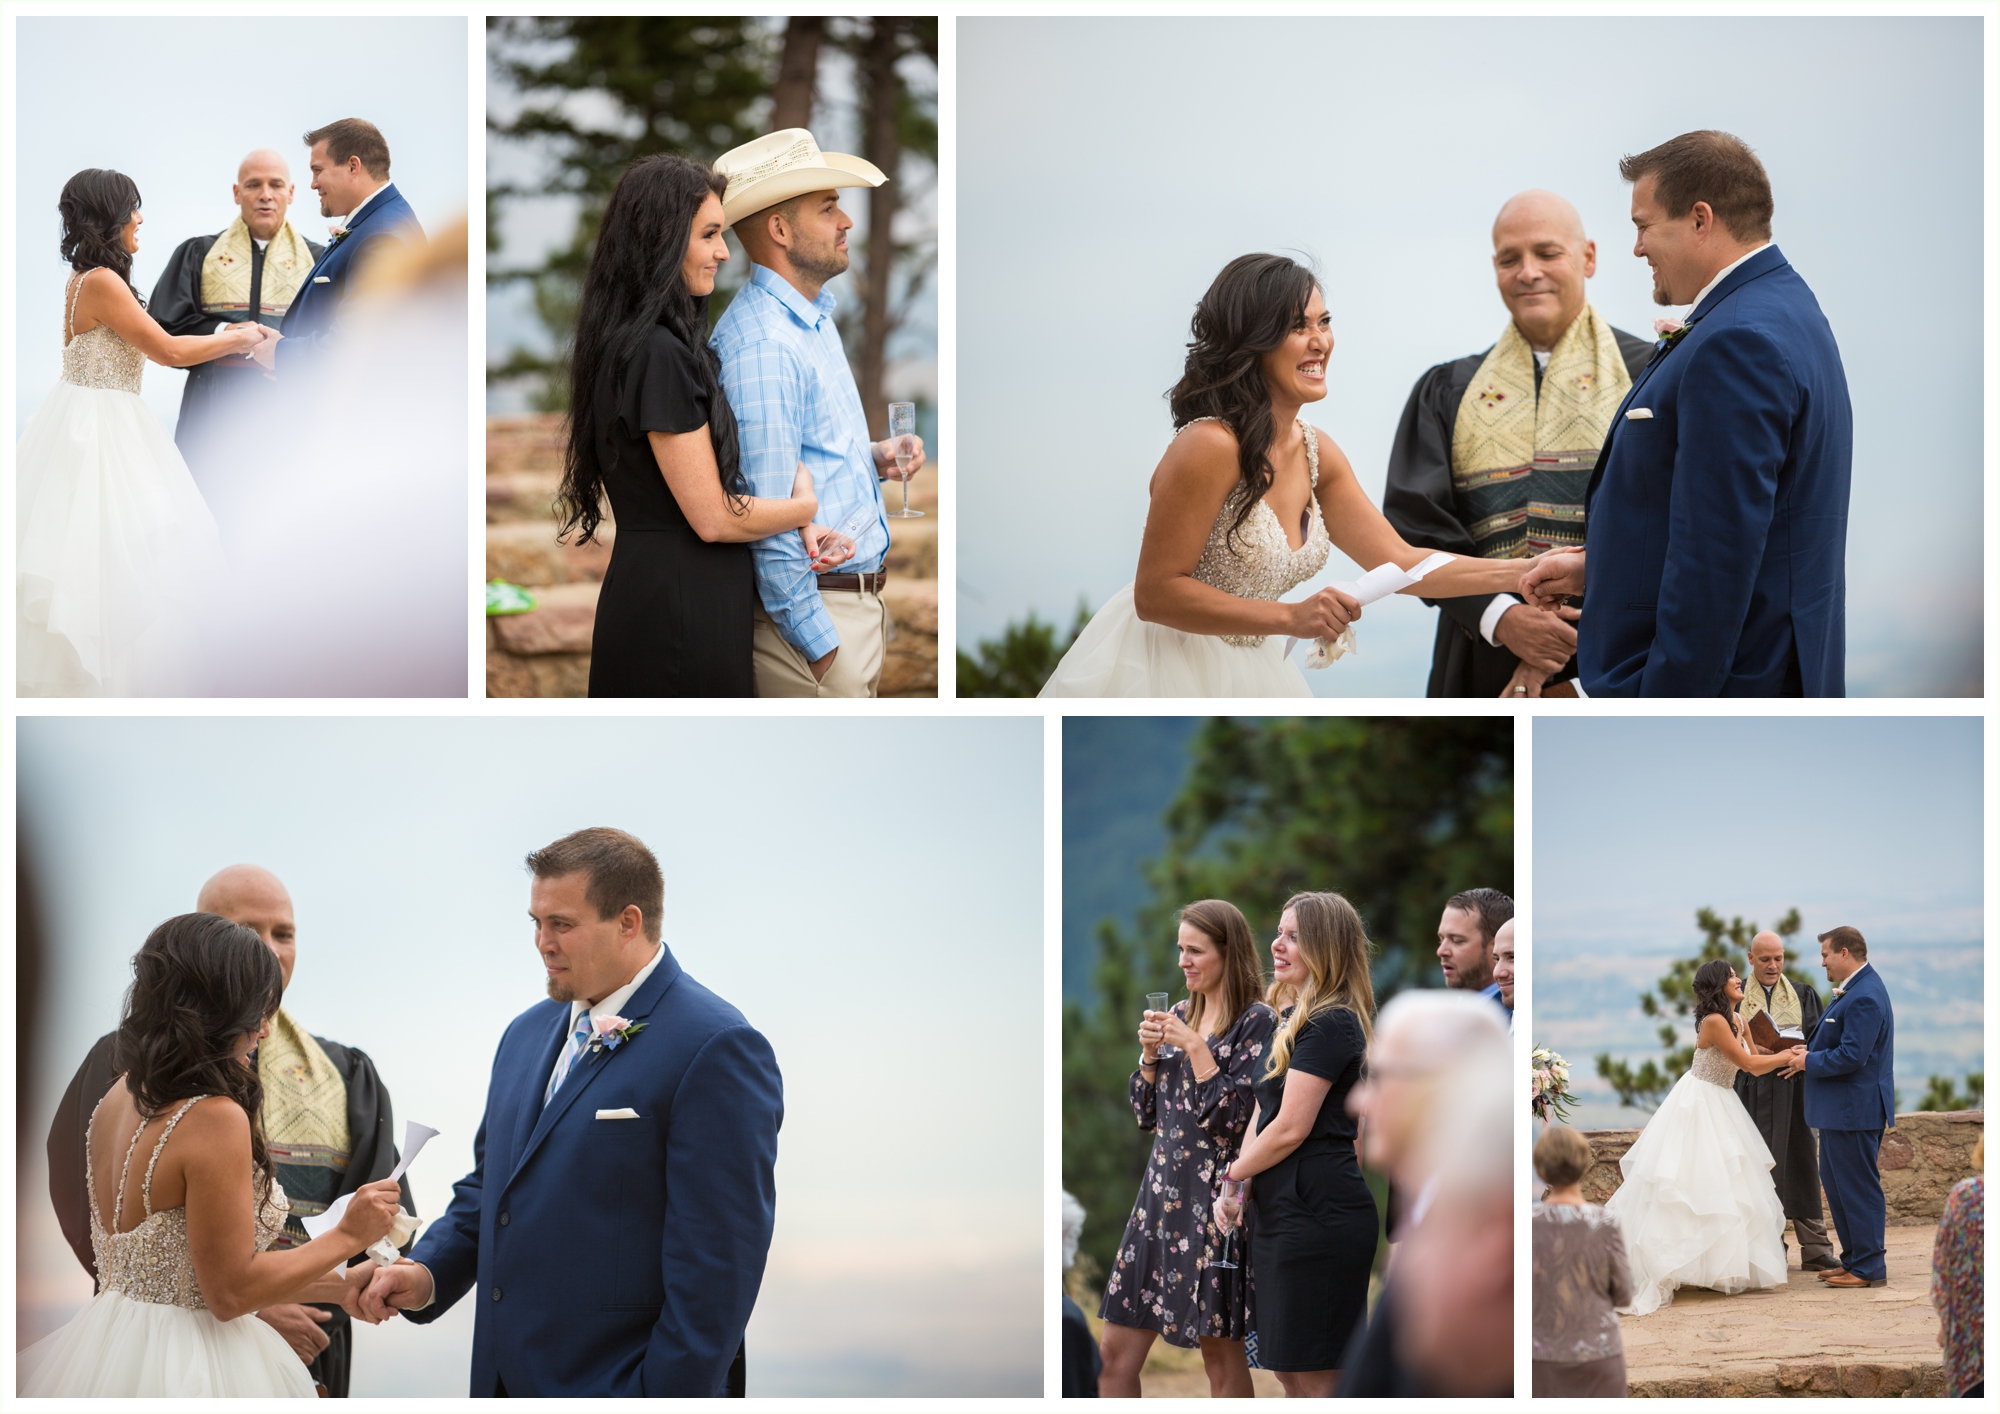 sunrise amphitheater wedding ceremony candids and laughter